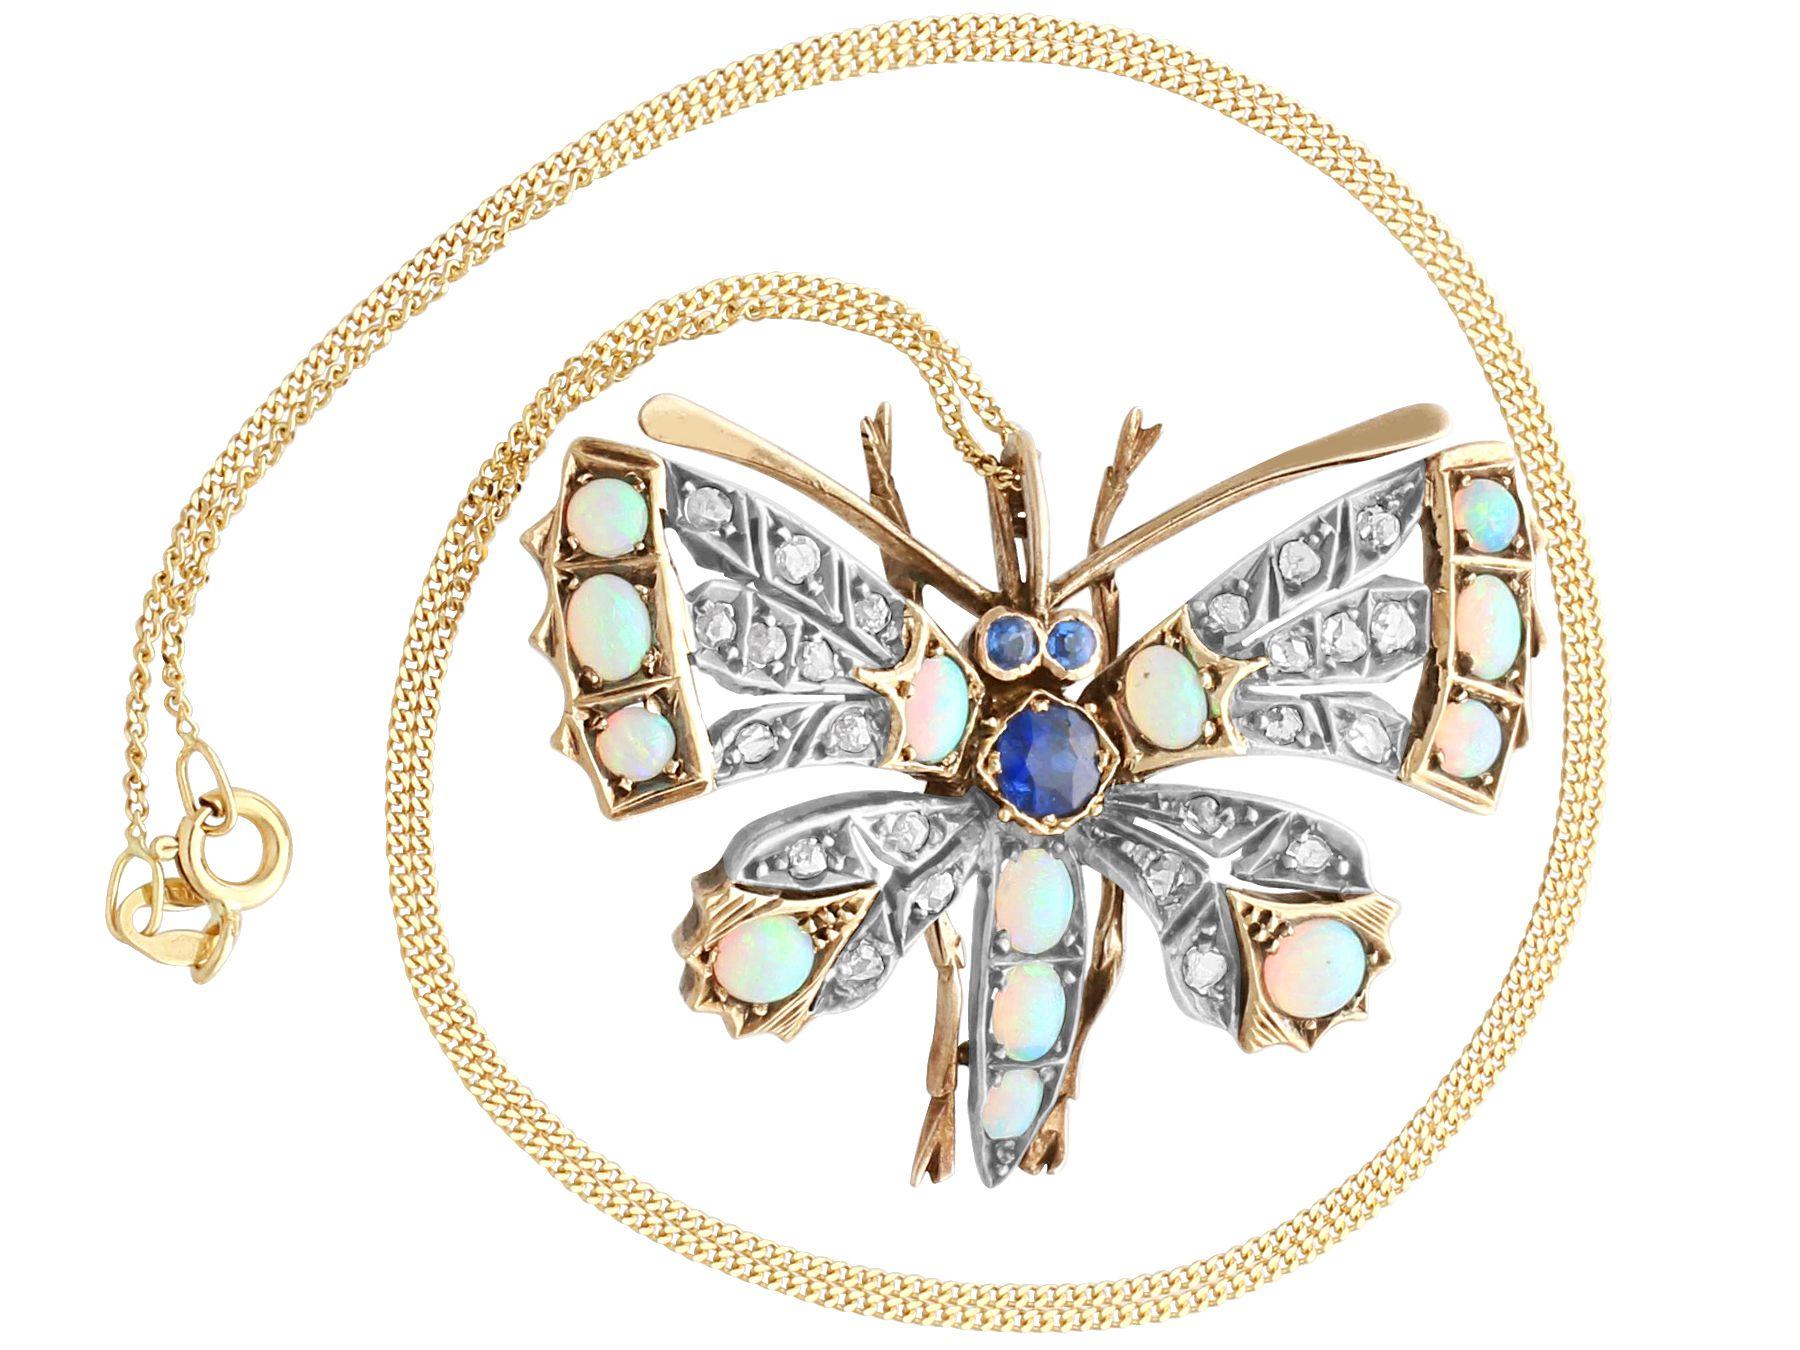 A stunning, fine and impressive antique 1.91 Carat opal, 0.88 Carat diamond and 0.54 Carat sapphire, silver set butterfly brooch; part of our antique jewelry and estate jewelry collections.

This stunning, fine and impressive antique pendant/brooch